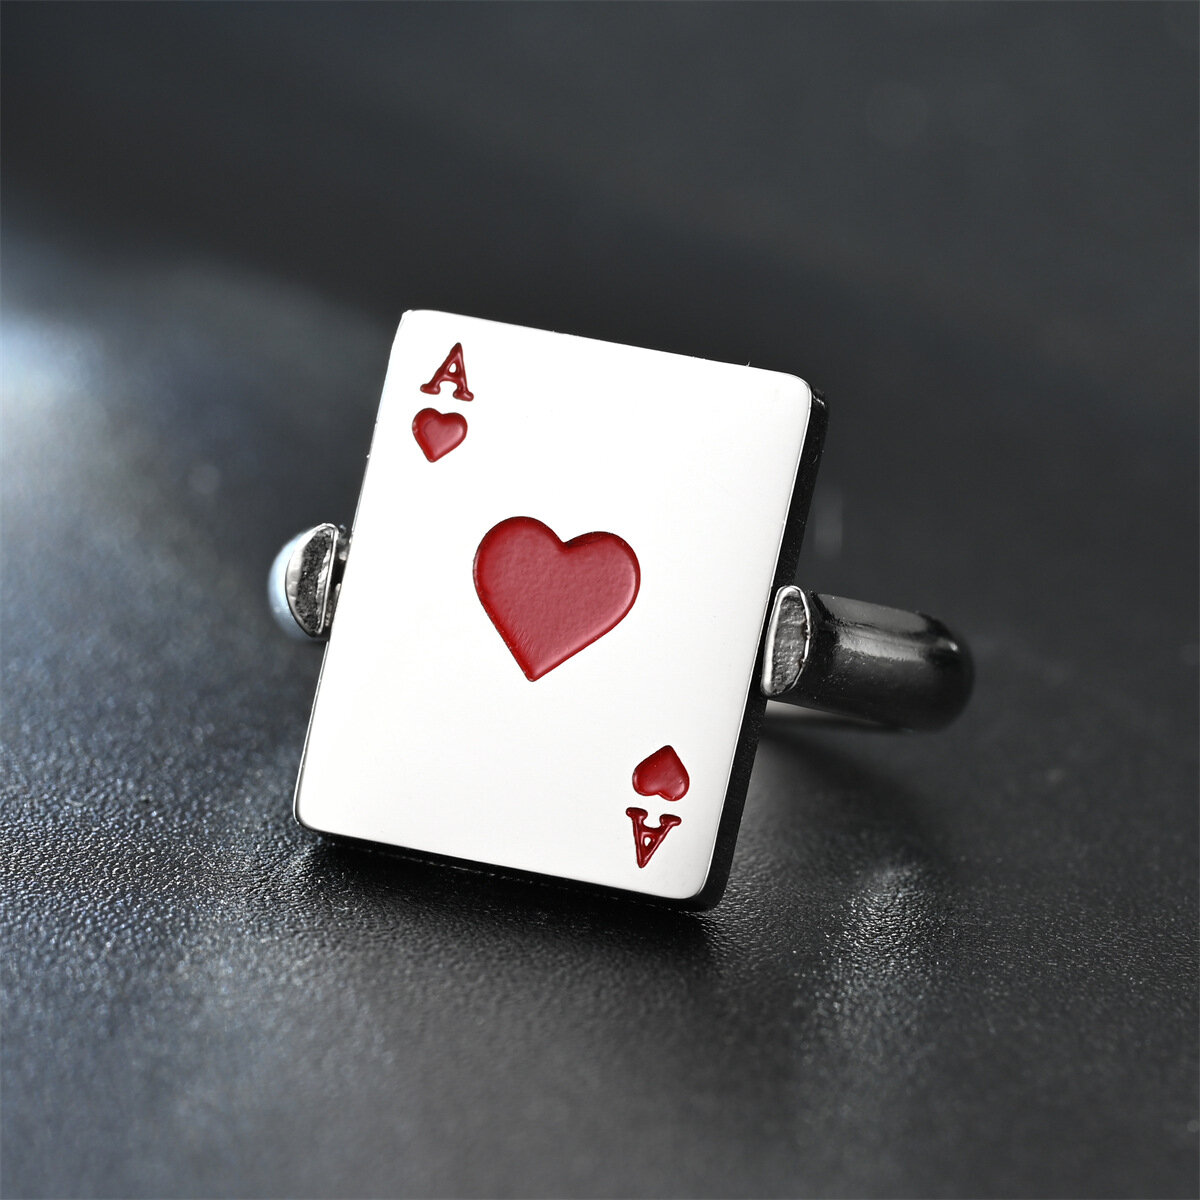 1 PC Fashion Stainless Steel Decompression Turning Flipped Ace Of Hearts Ring